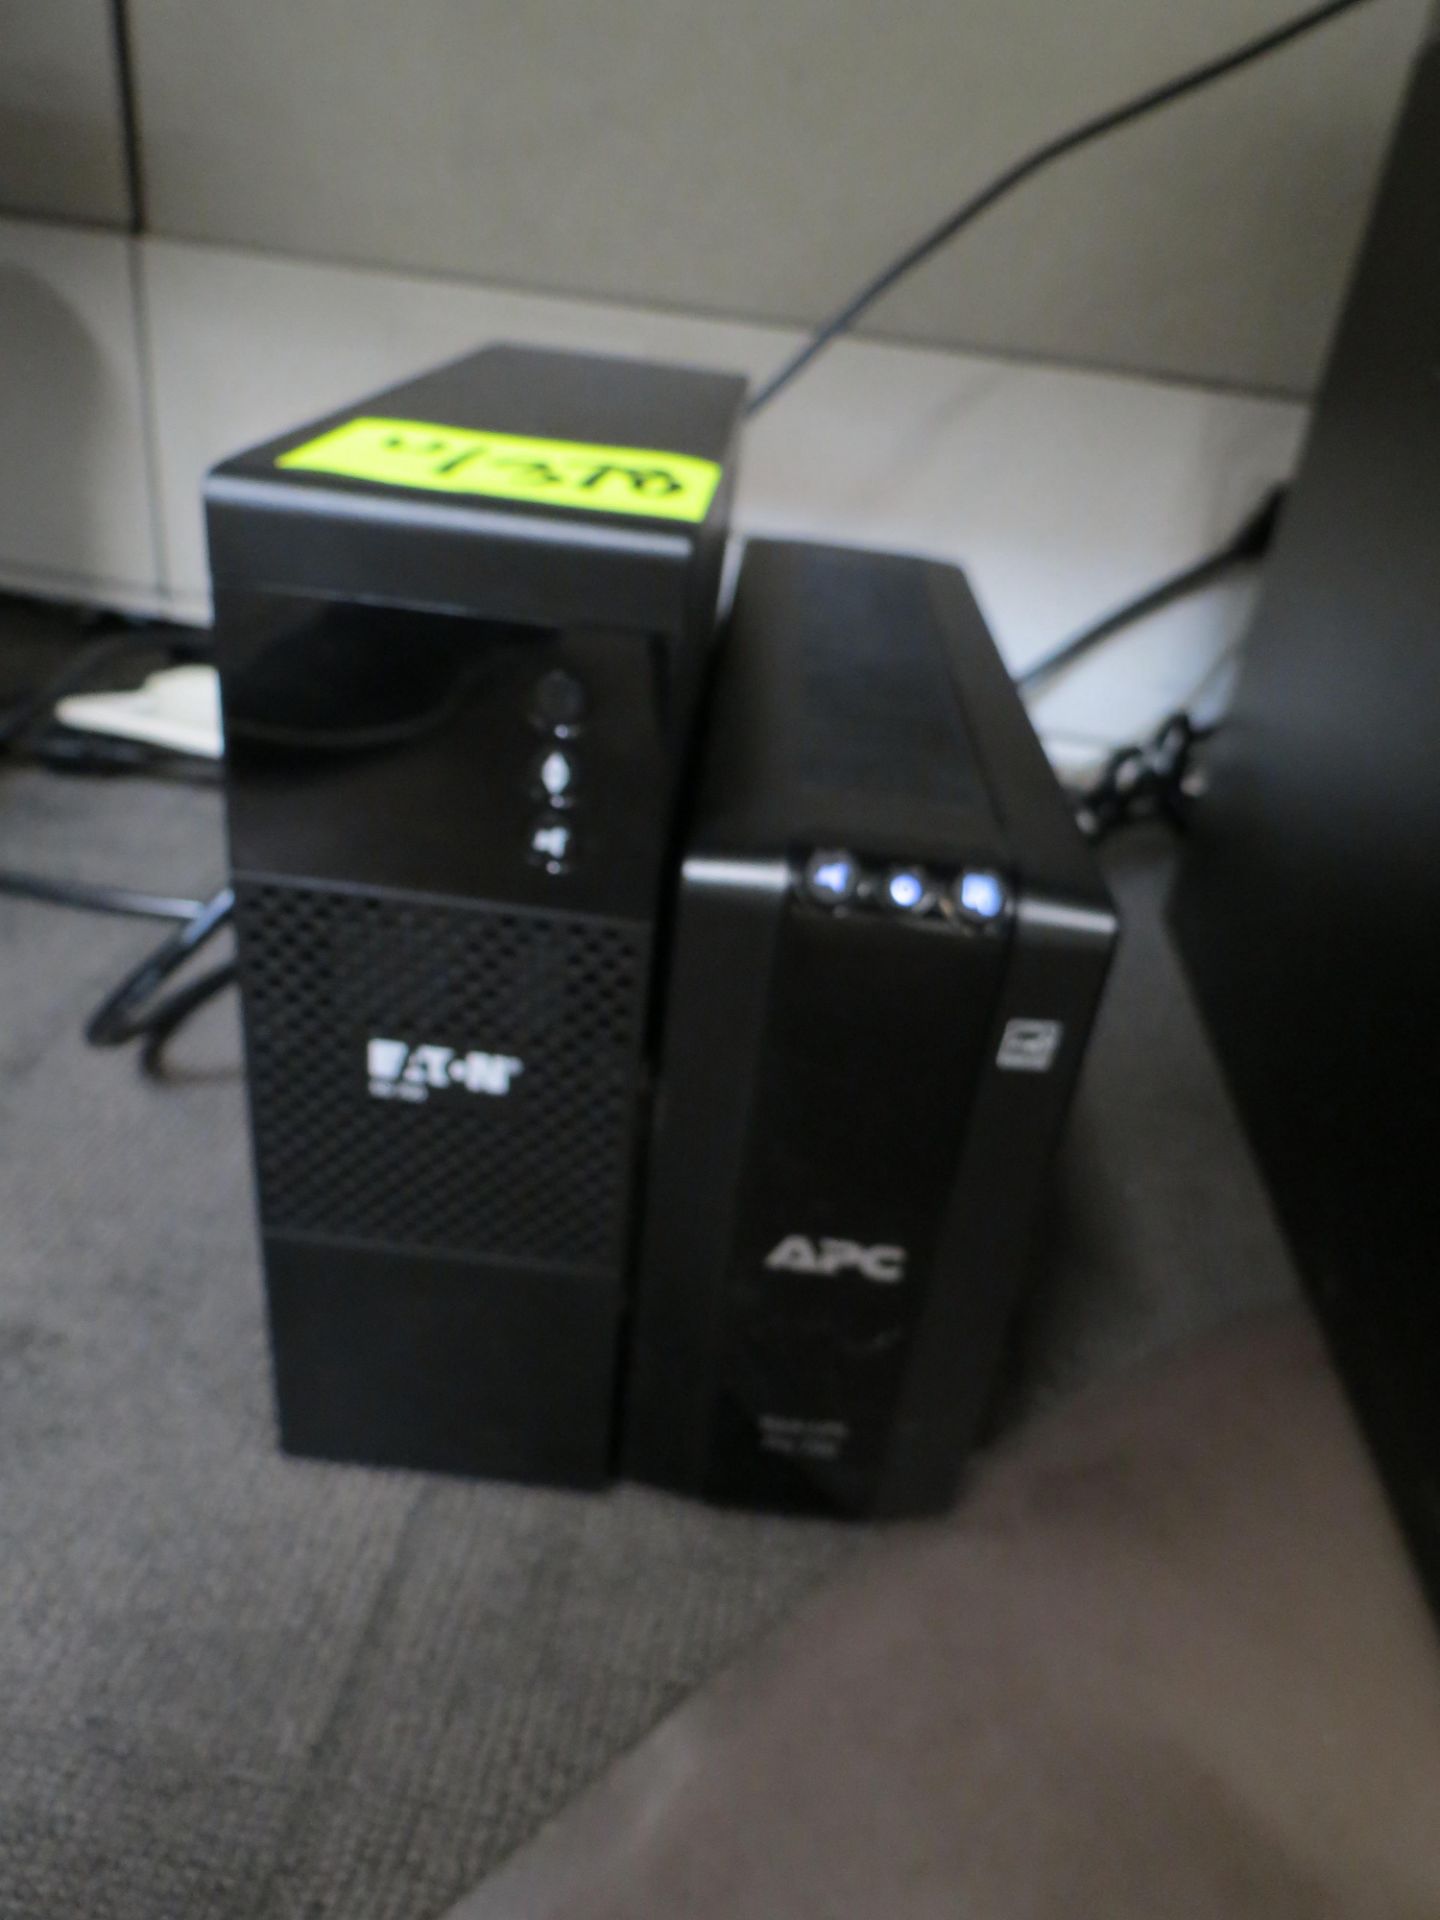 DELL PRECISION TOWER 5810, LENOVO THINKCENTRE TOWER, EATON UPS POWER SUPPLY, APC UPS POWER SUPPLY, 3 - Image 3 of 5